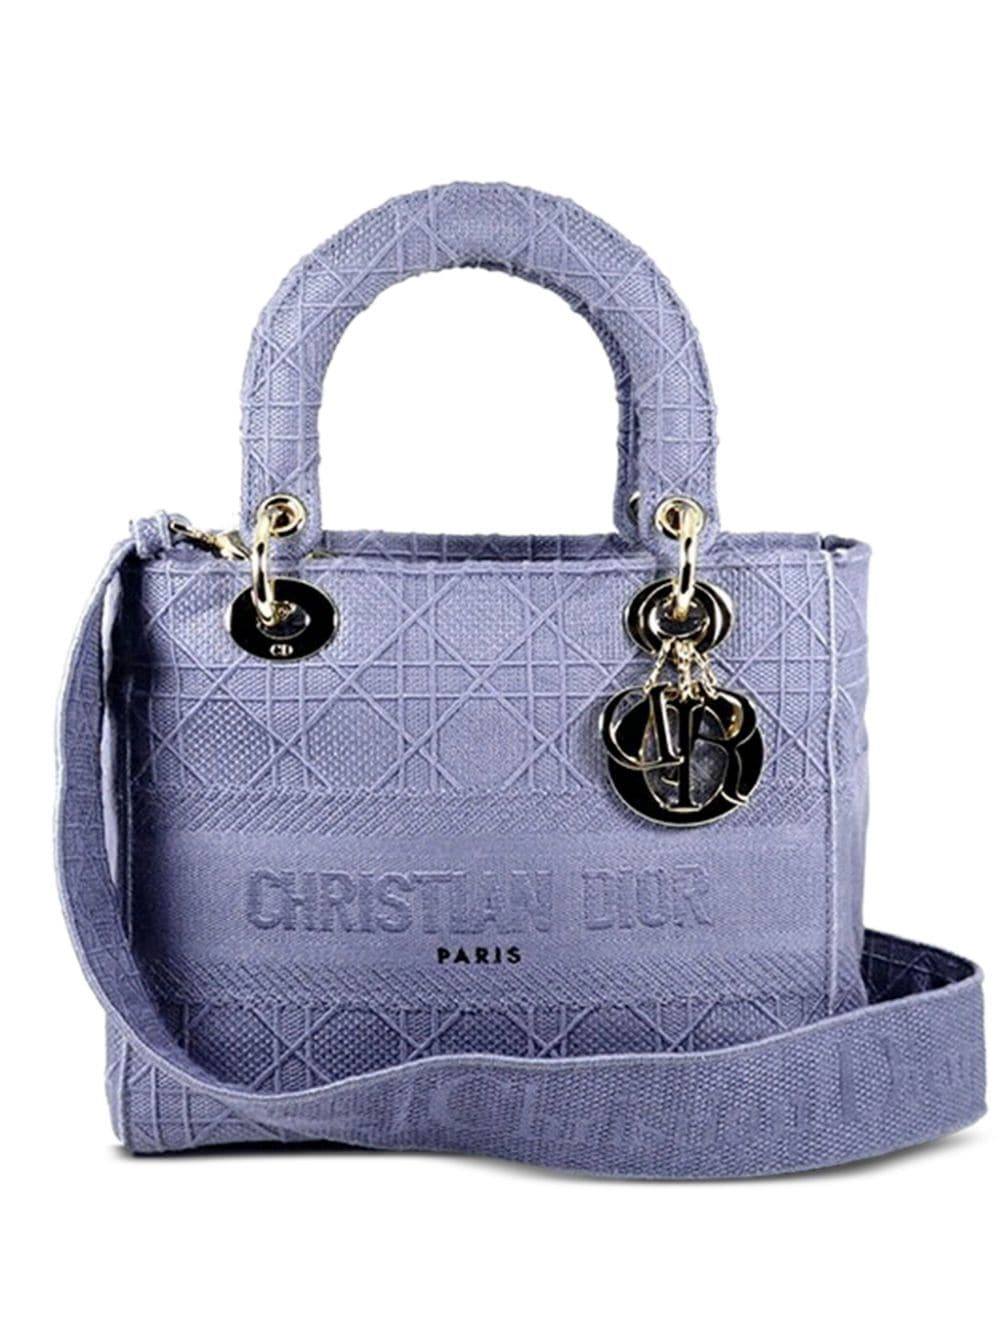 Christian Dior Pre-Owned Lady D-Lite Handtasche - Violett von Christian Dior Pre-Owned